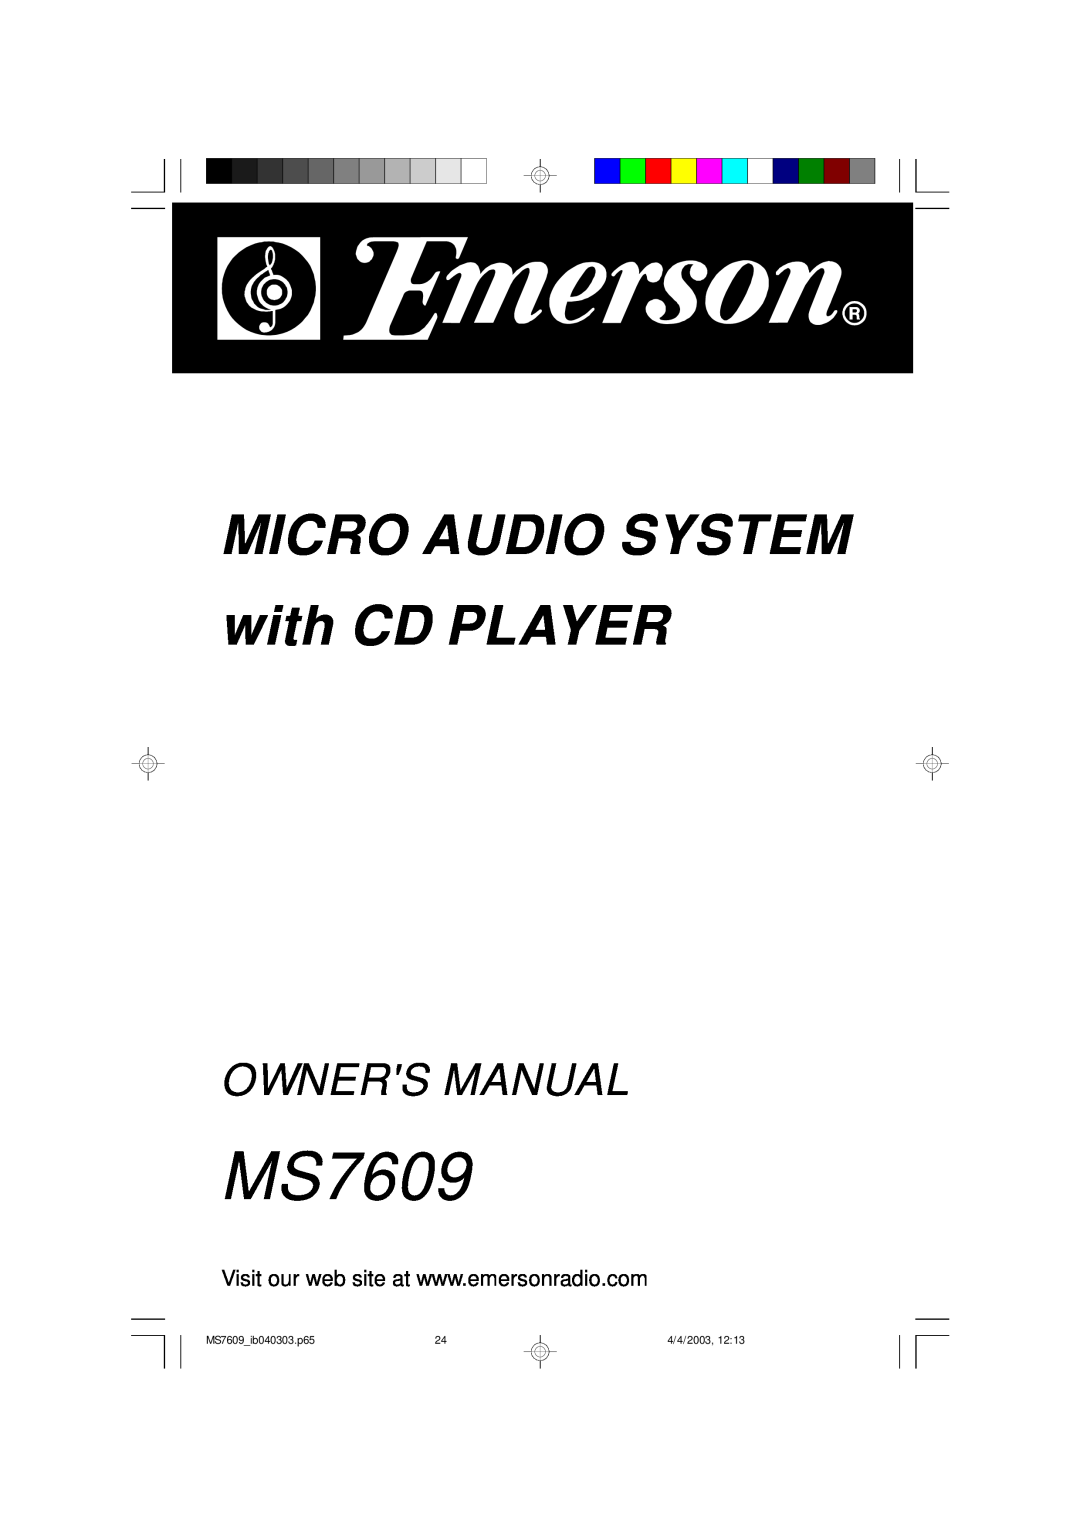 Emerson owner manual MICRO AUDIO SYSTEM with CD PLAYER, MS7609 ib040303.p65, 4/4/2003, 12 